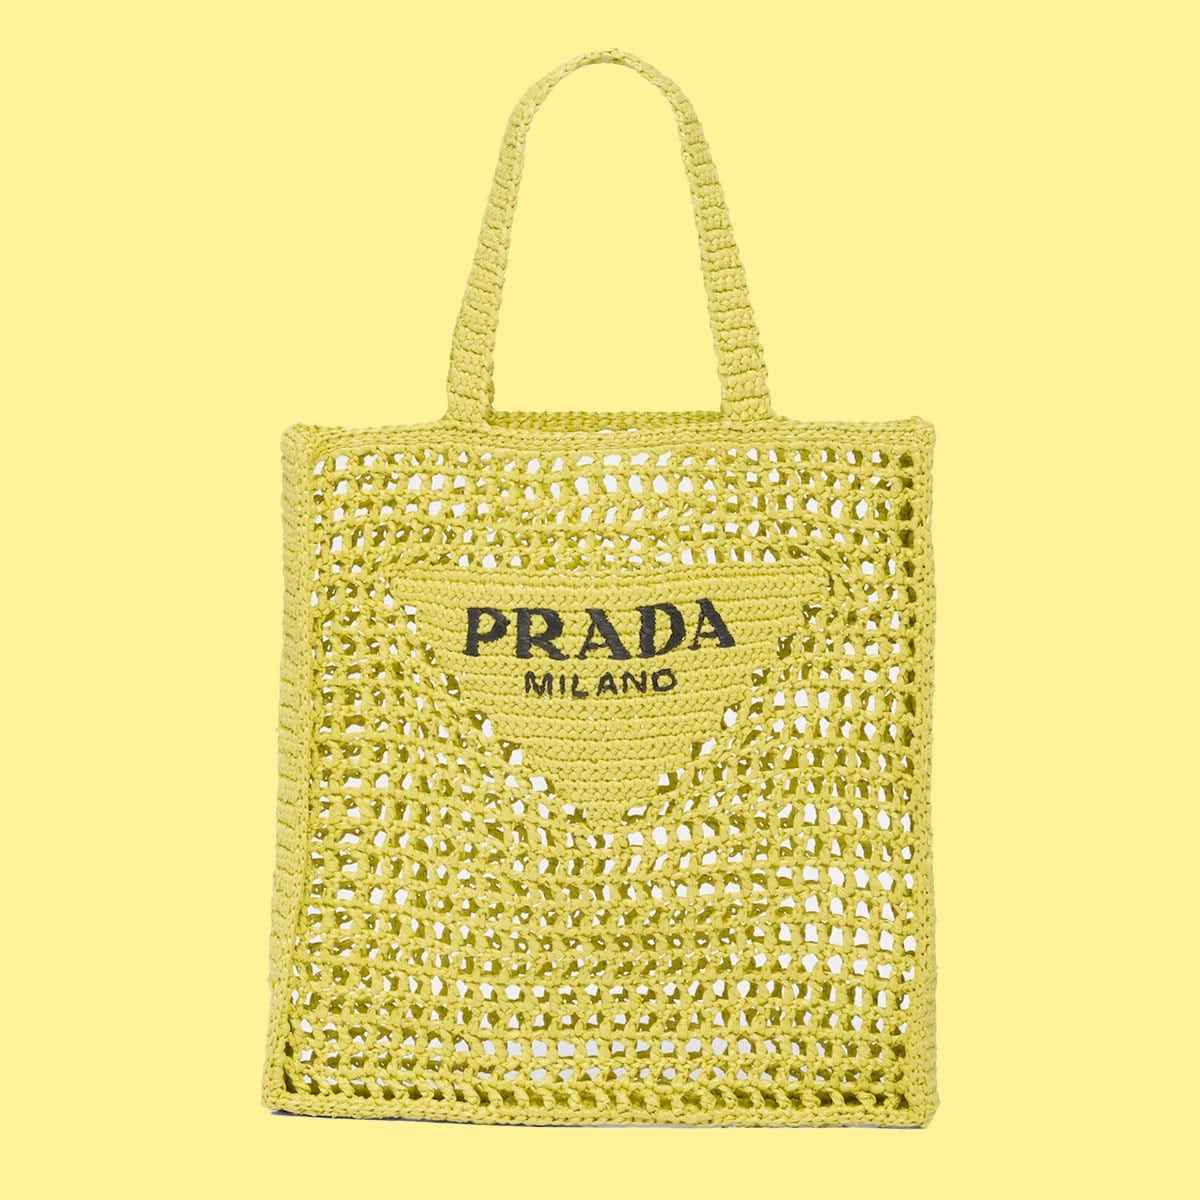 IMPOSSIBLE TO FIND! Prada Raffia Tote Bag Unboxing + Review